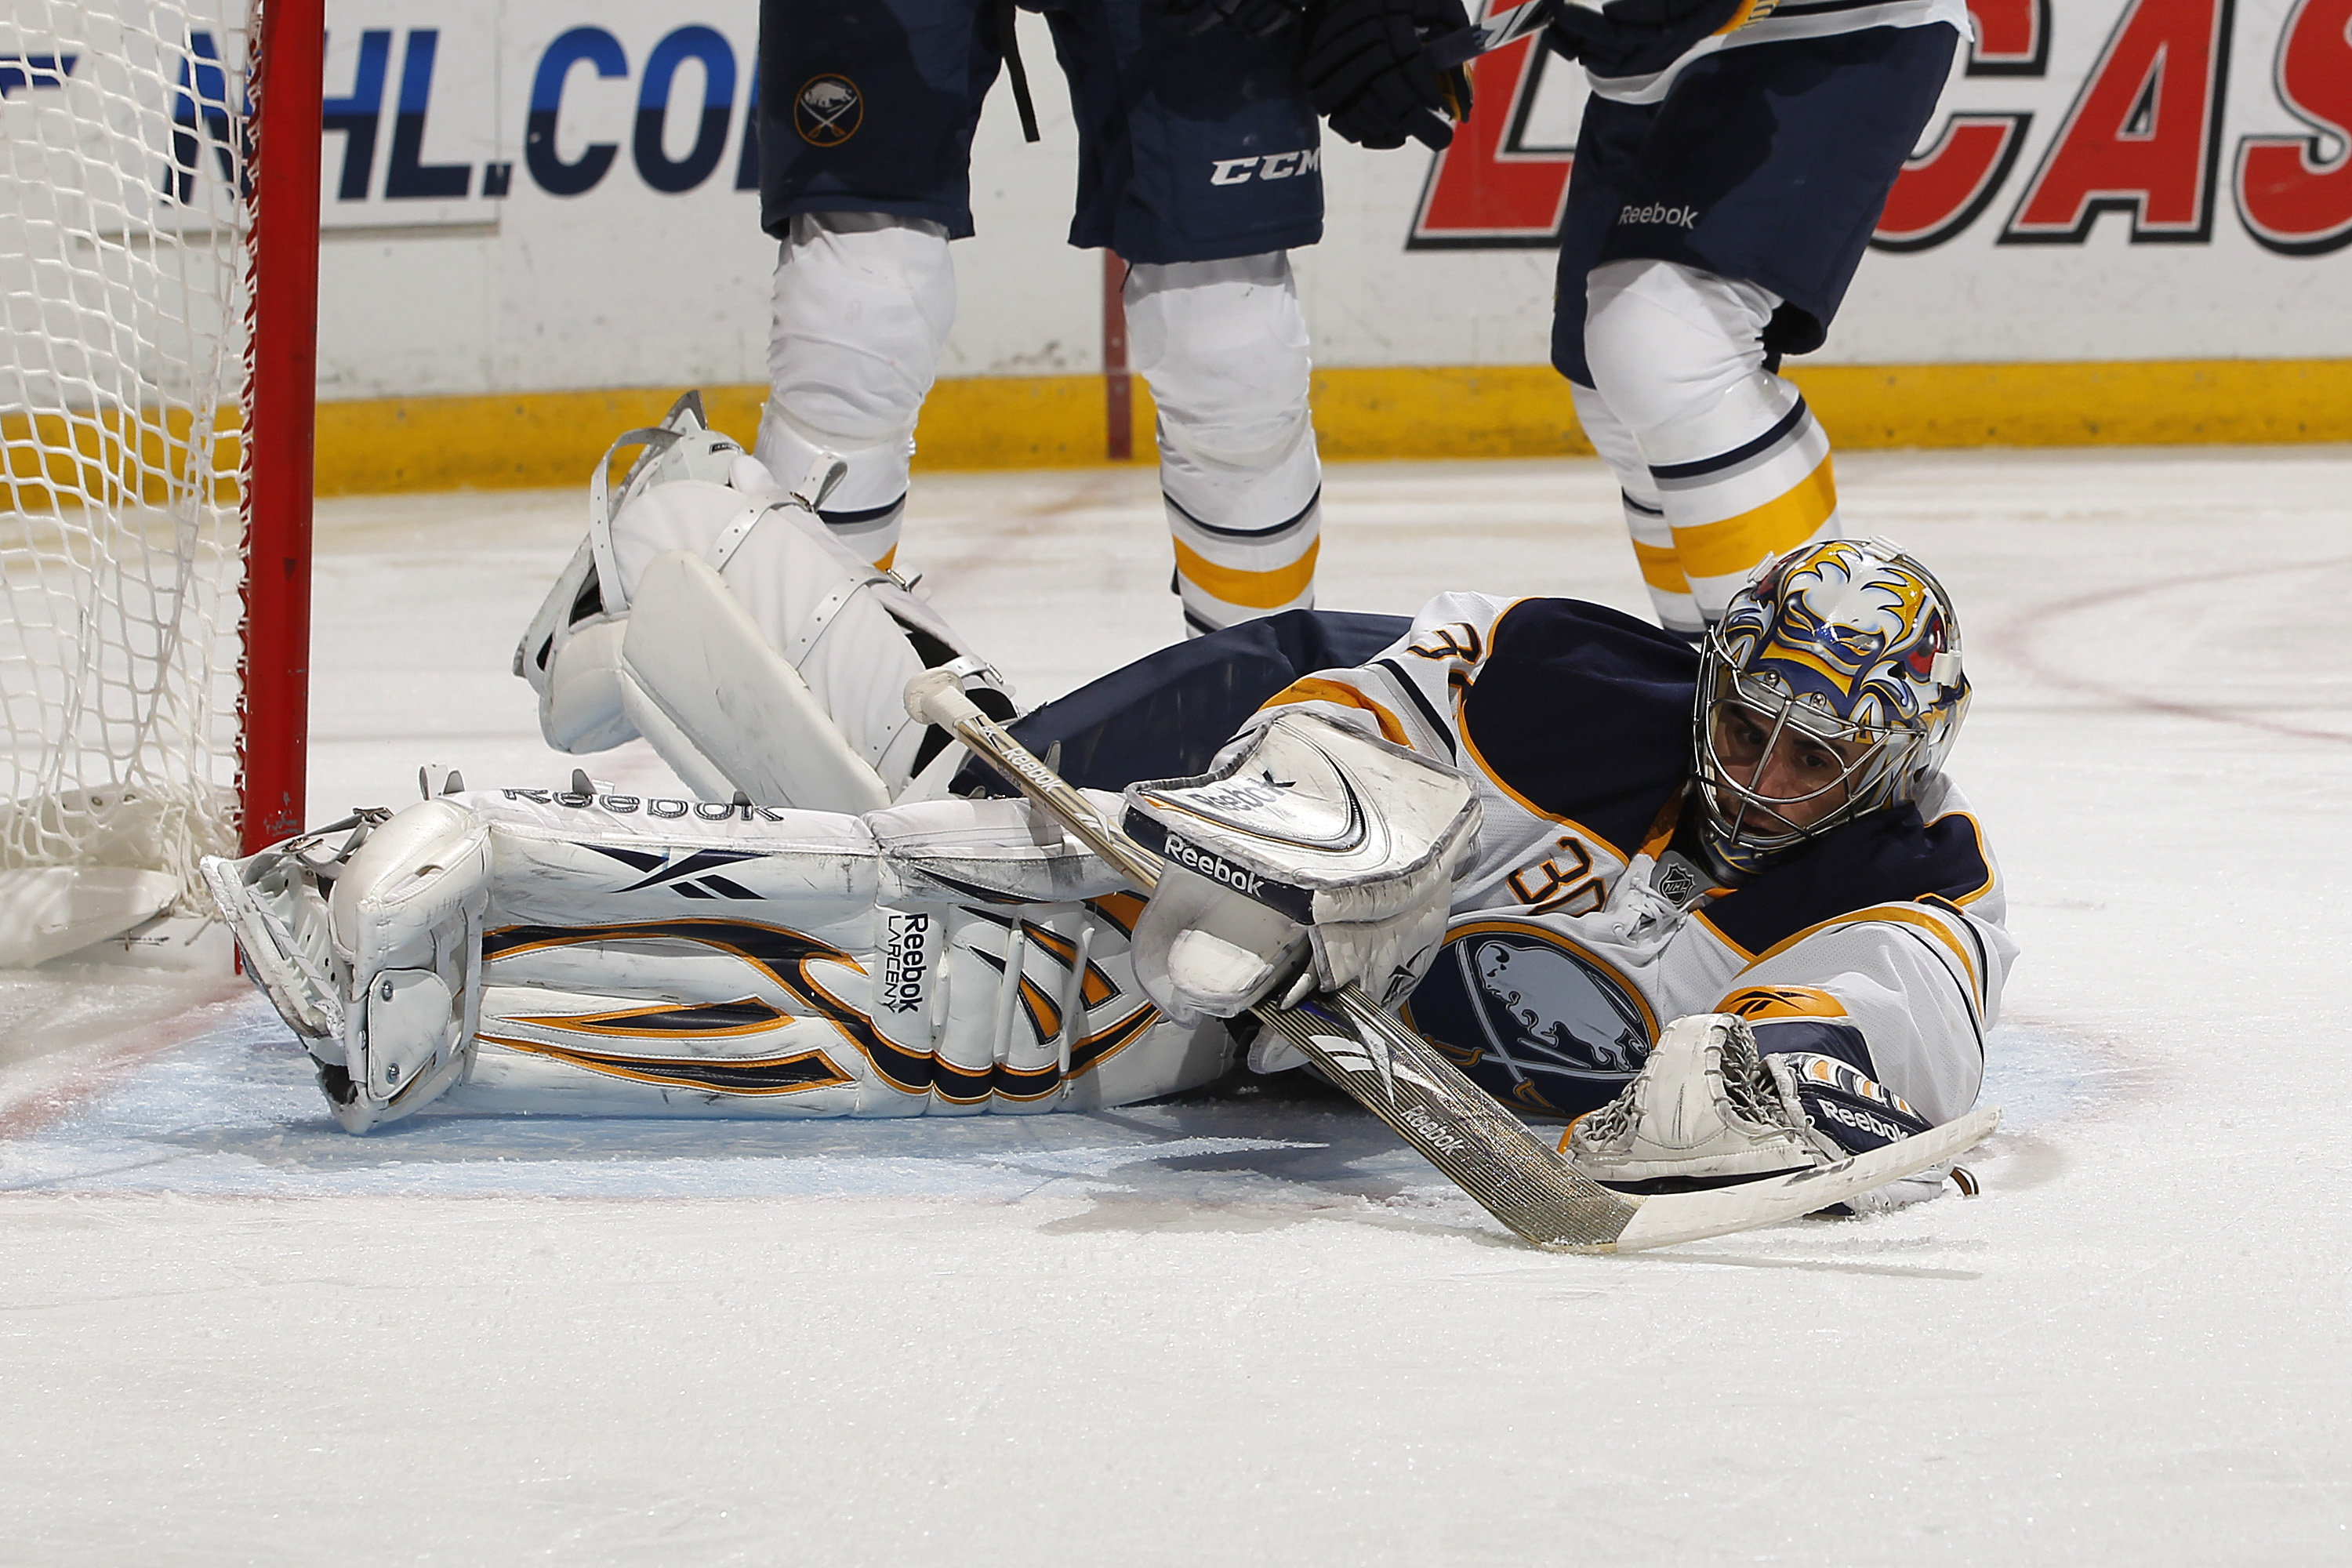 SUNRISE, FL - DECEMBER 17: Goaltender Ryan Miller #30 of the Buffalo Sabres makes a save against the Florida Panthers on December 17, 2010 at the BankAtlantic Center in Sunrise, Florida. The Panthers defeated the Sabres 6-2. (Photo by Joel Auerbach/Getty